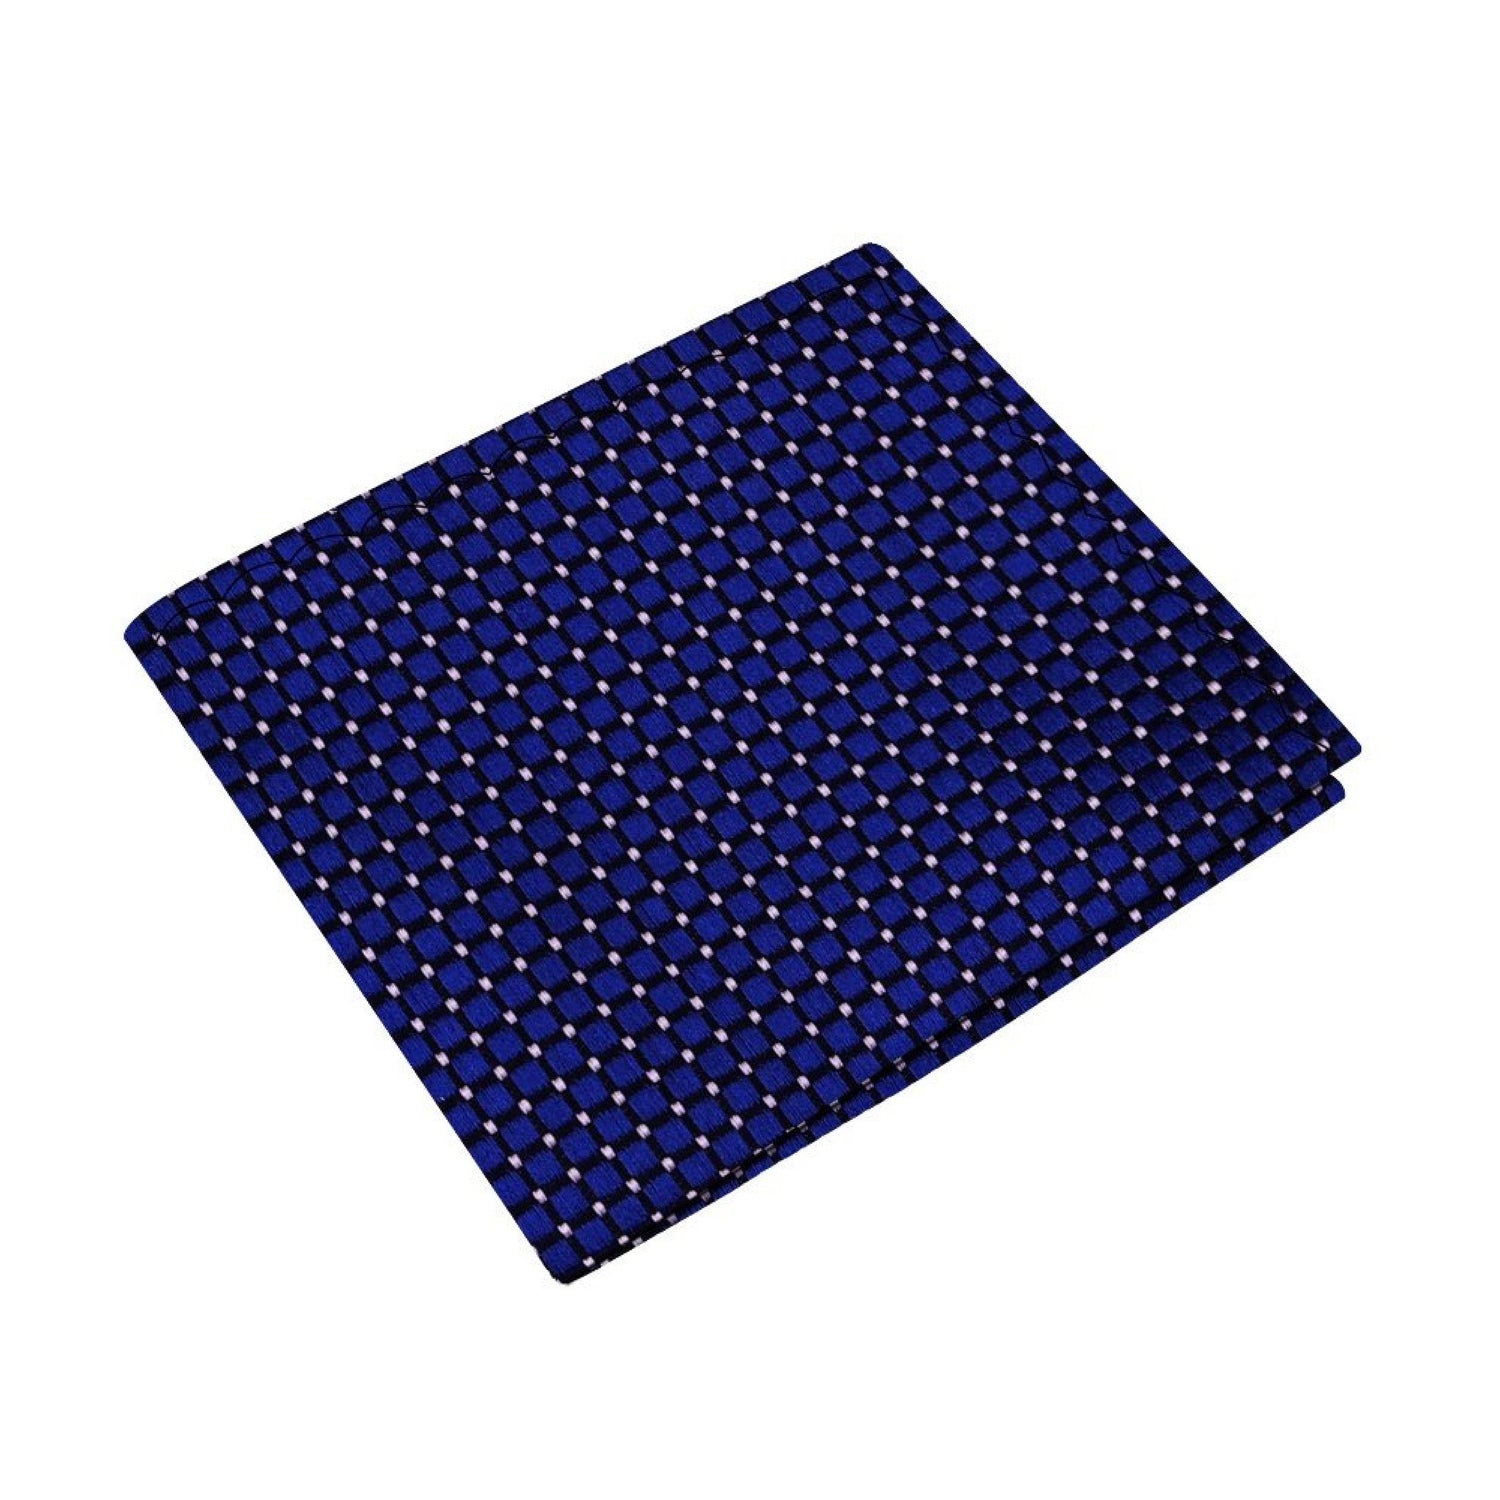 Main View: Dark Blue, White Color Small Geometric with Check Pattern Silk Pocket Square